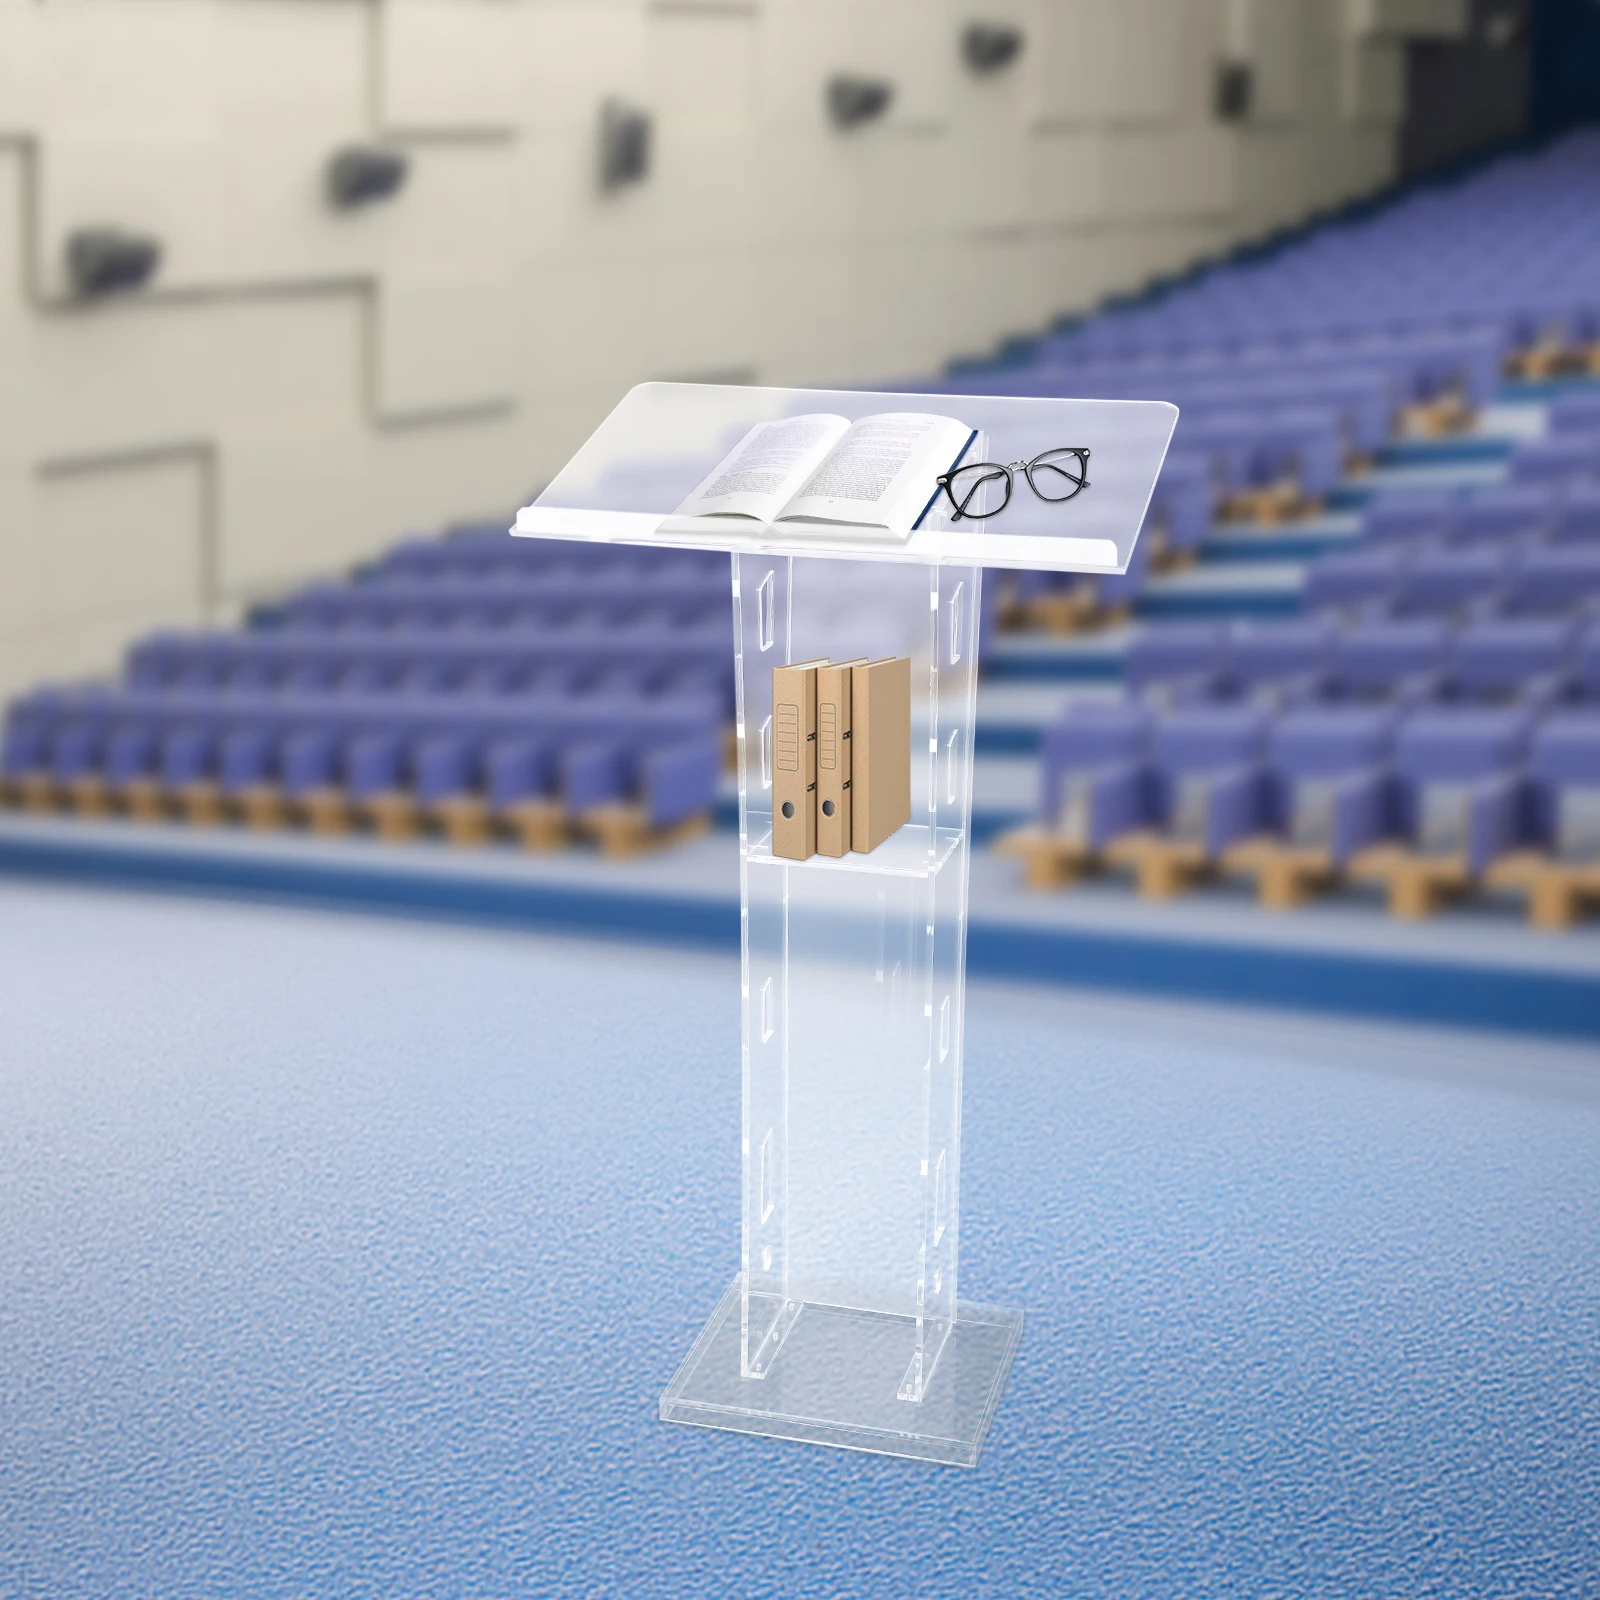 Acrylic Podium Clear Pulpit Conference Presentation Stand Church Lectern 43.3 inch Transparent Lectern School 3 5 case for nextion 3 5 inch touch tft lcd module display basic version acrylic transparent clear case